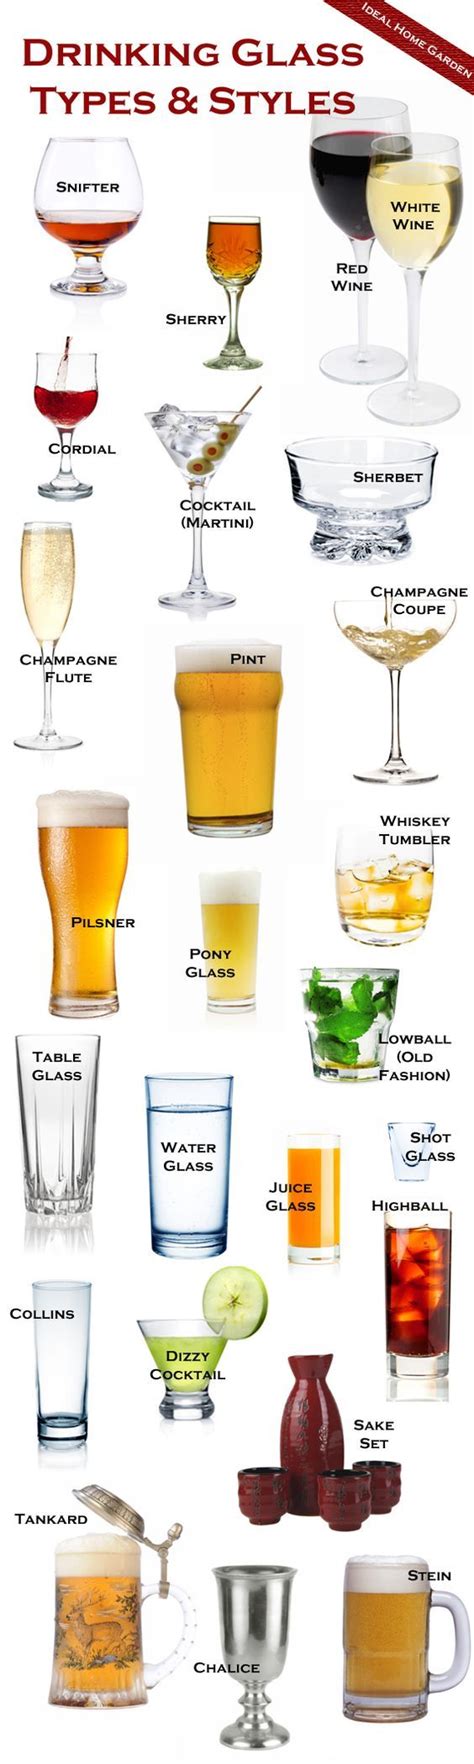 Types Of Drinking Glasses And Their Uses Ideal Home Garden Dezdemon Home Decor Ideasspace